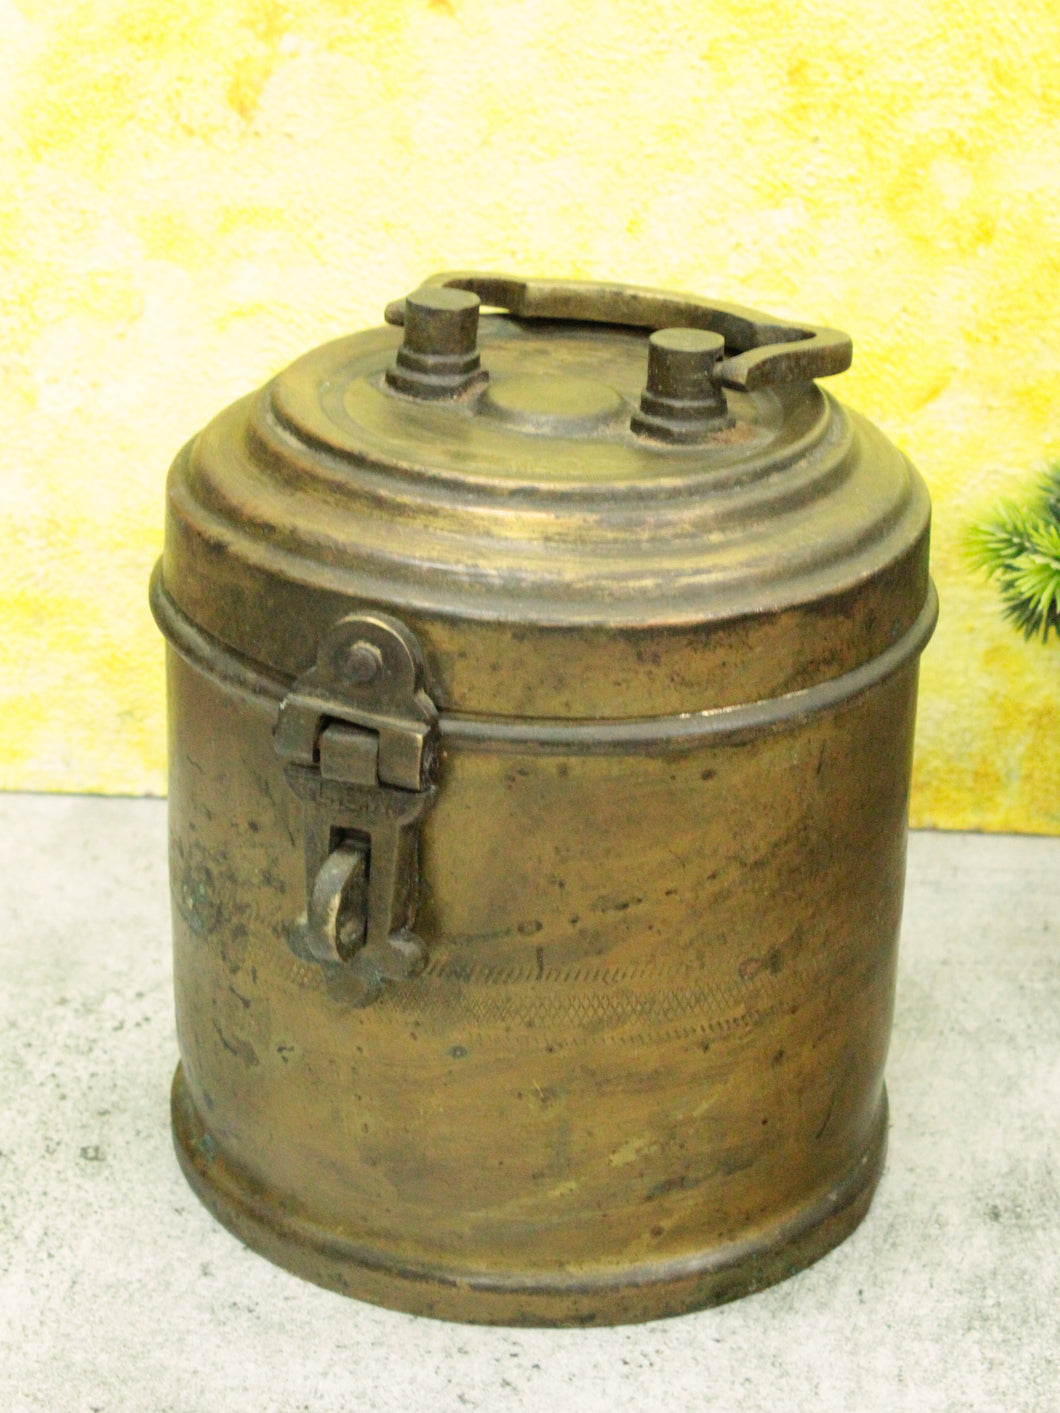 Elegant Vintage Brass Container with Handle